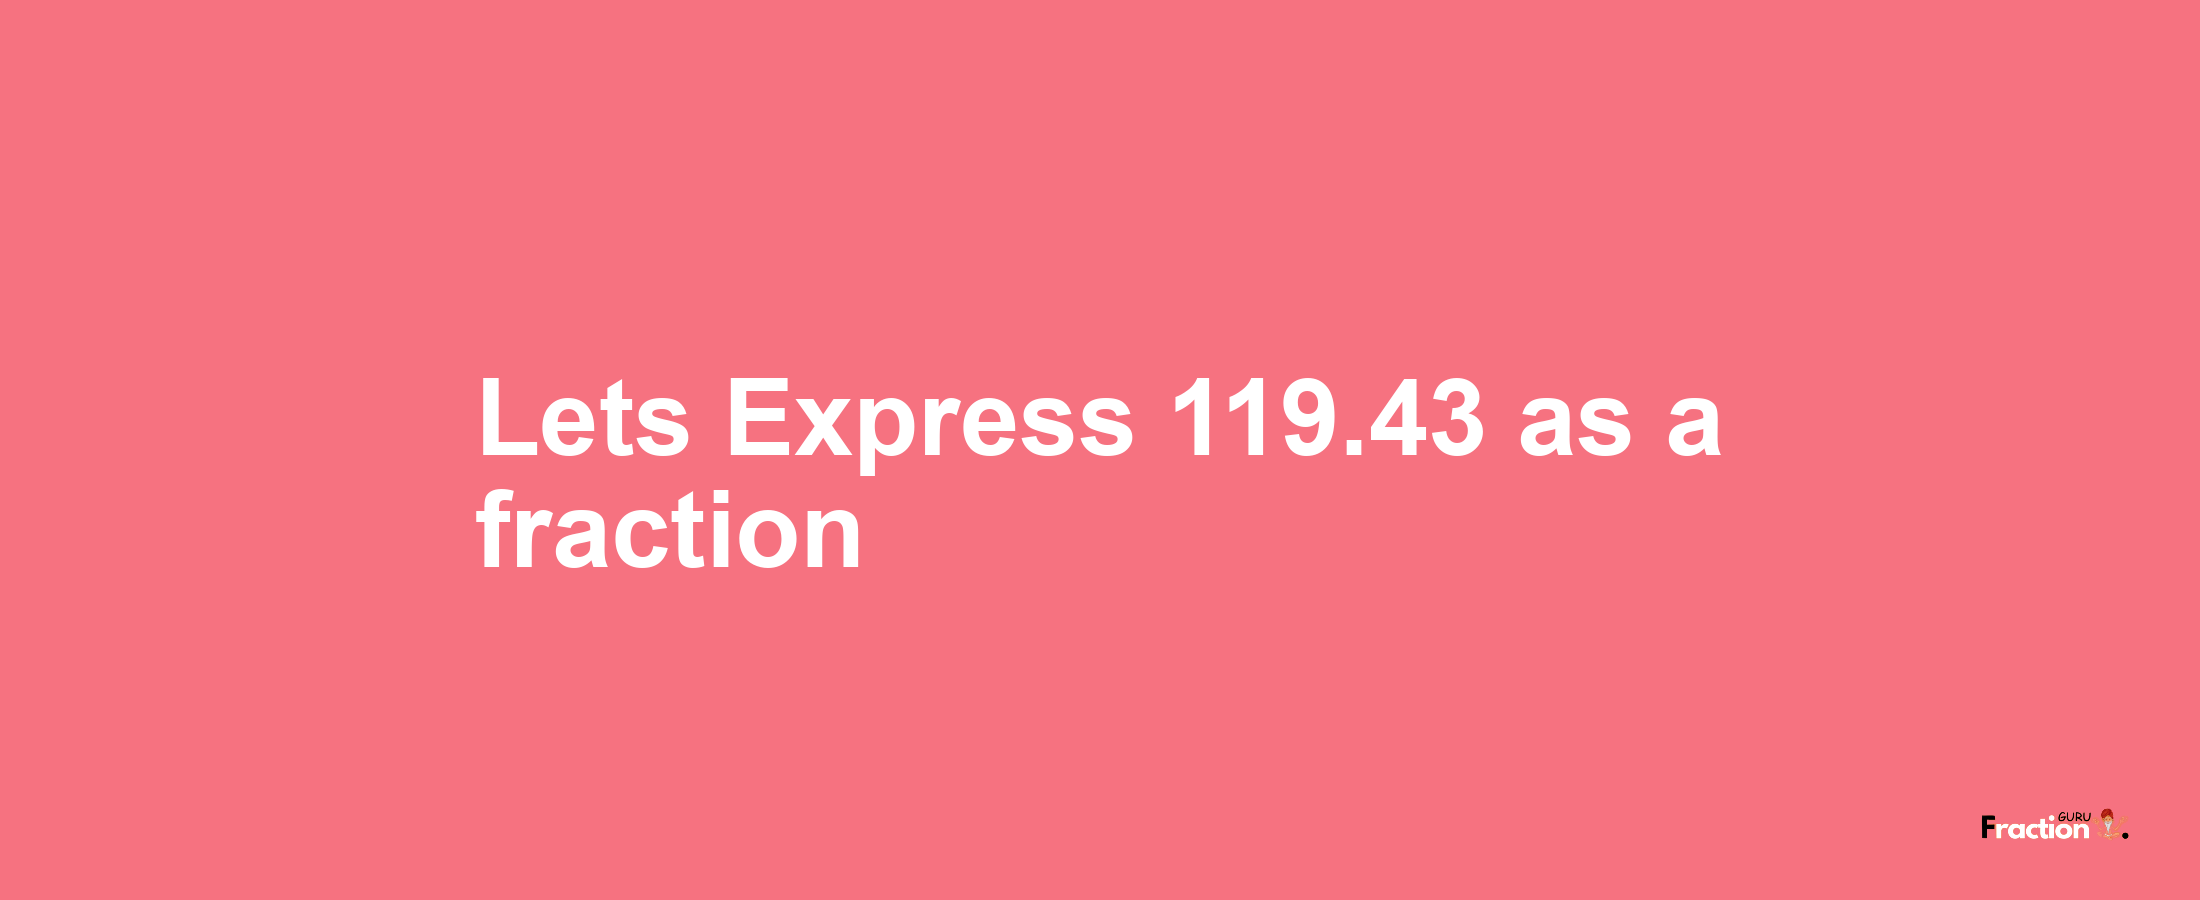 Lets Express 119.43 as afraction